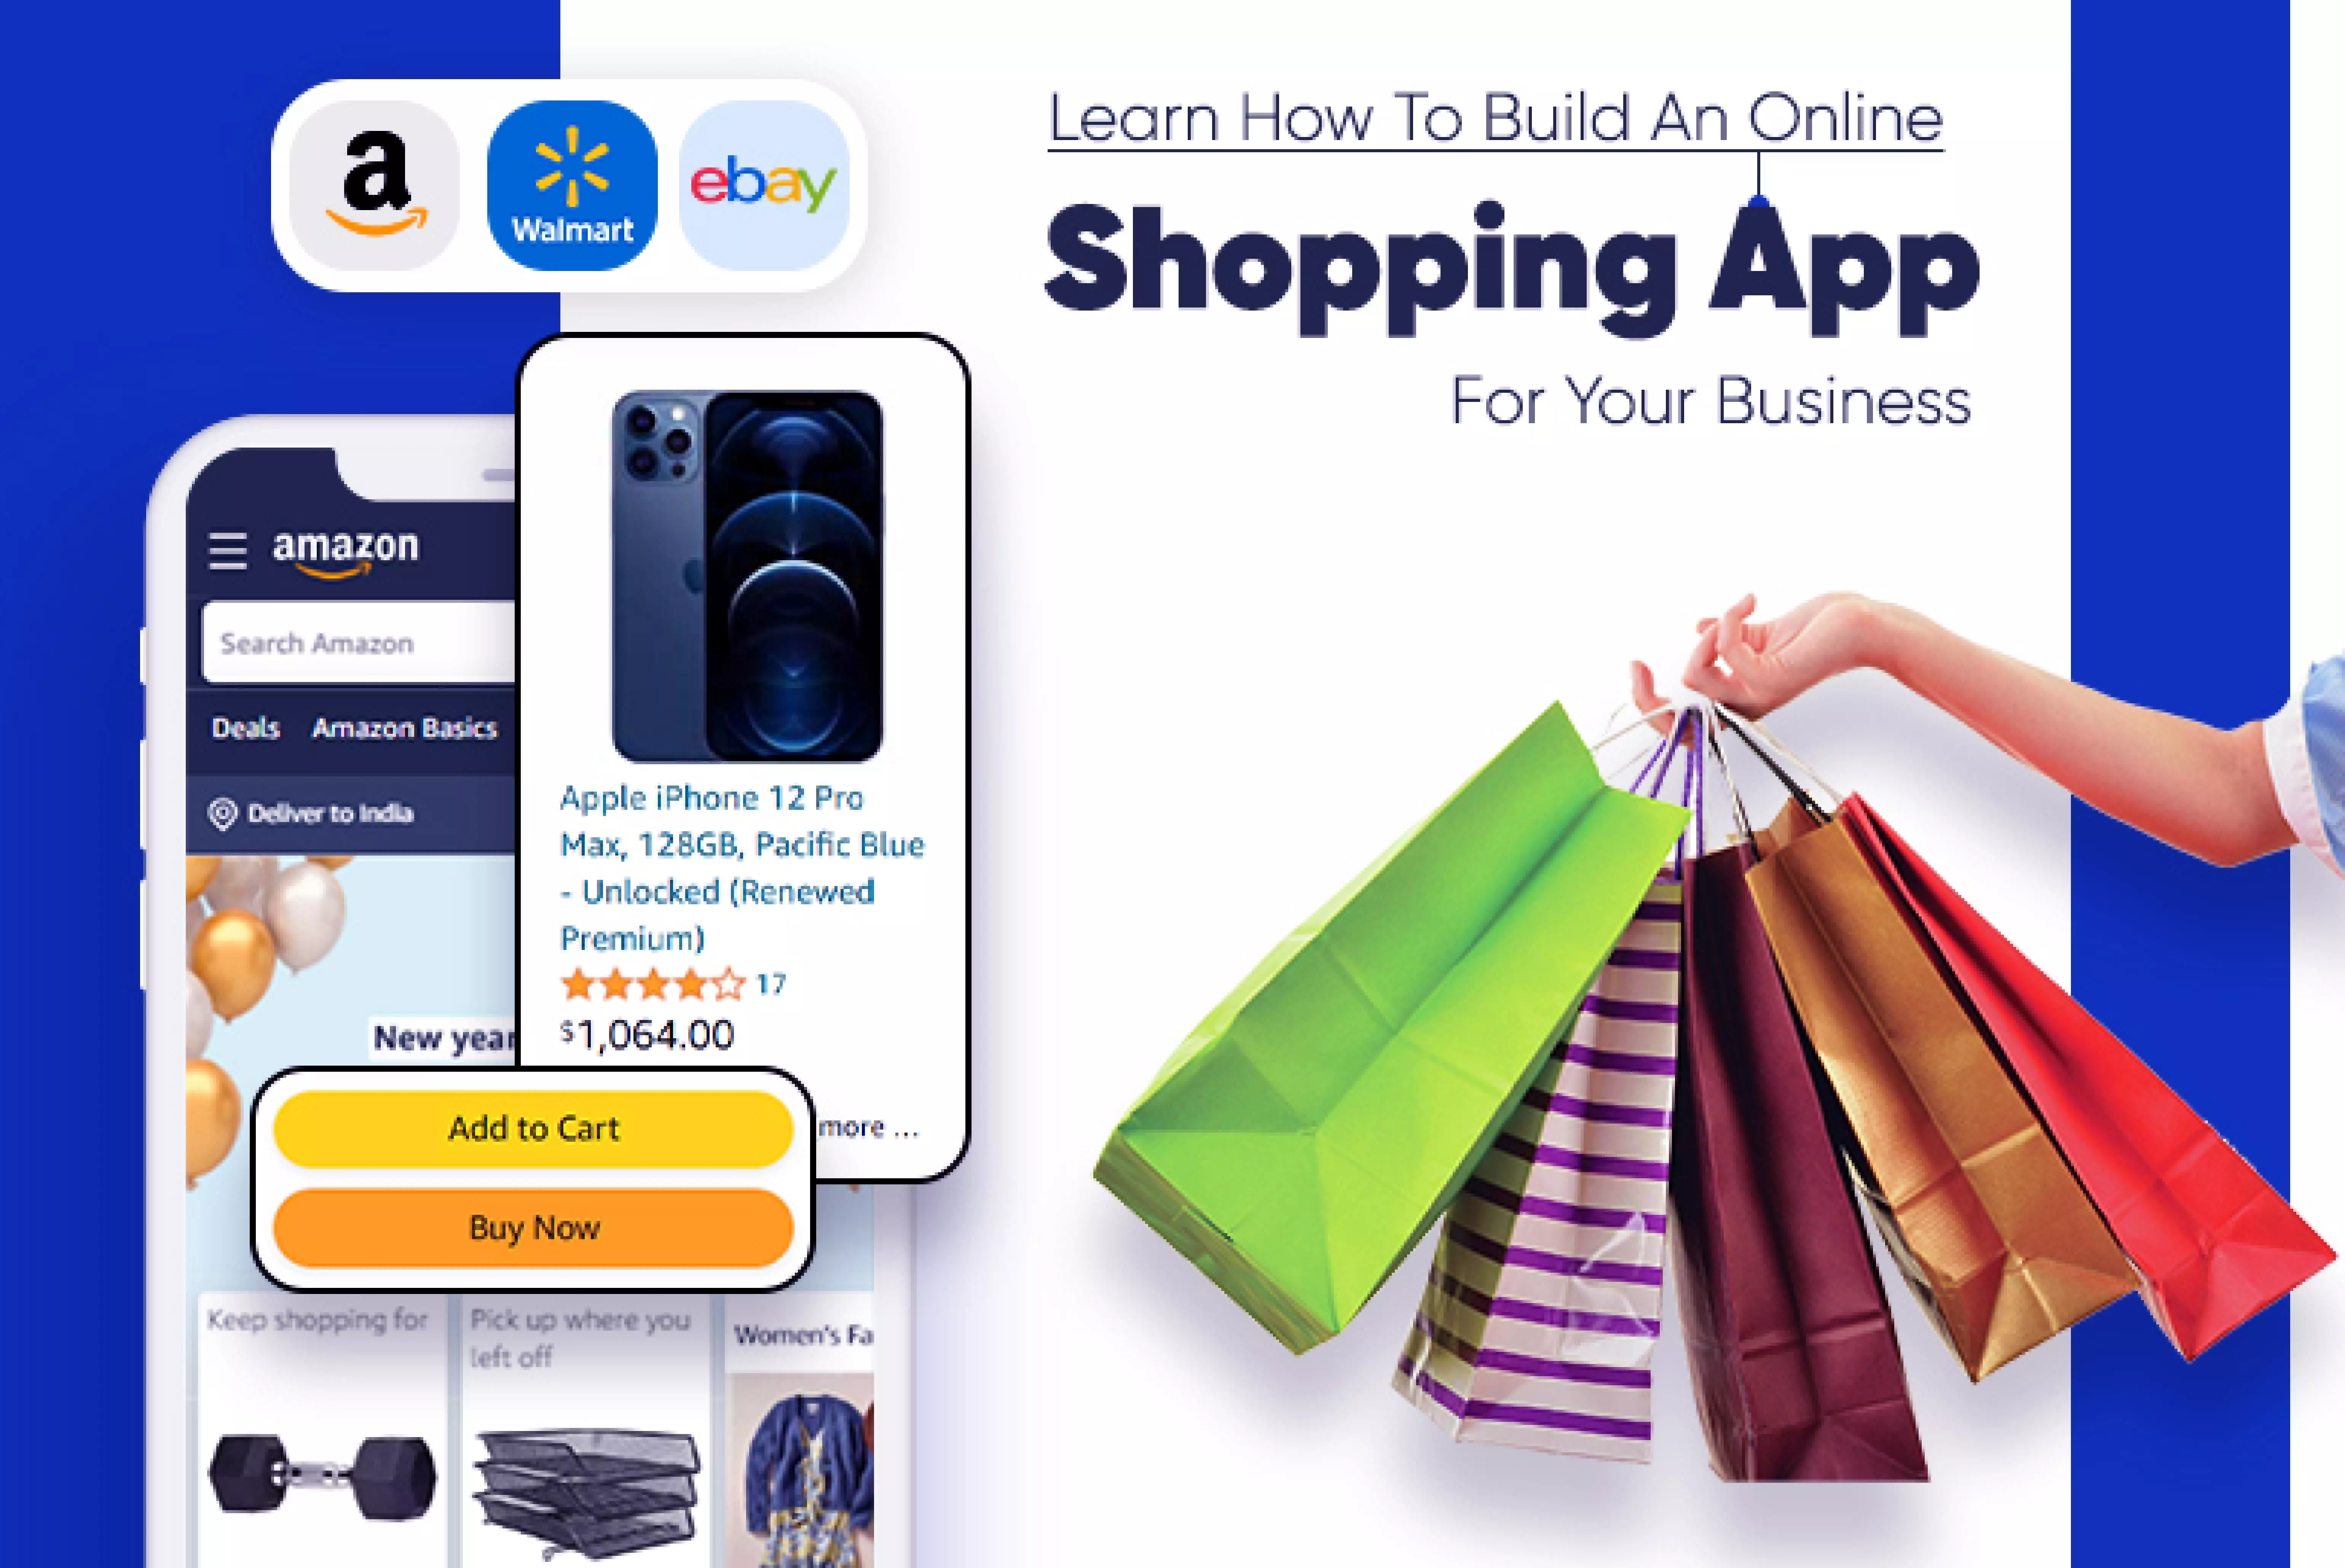 Learn How To Build An Online Shopping App For Your Business_Thum